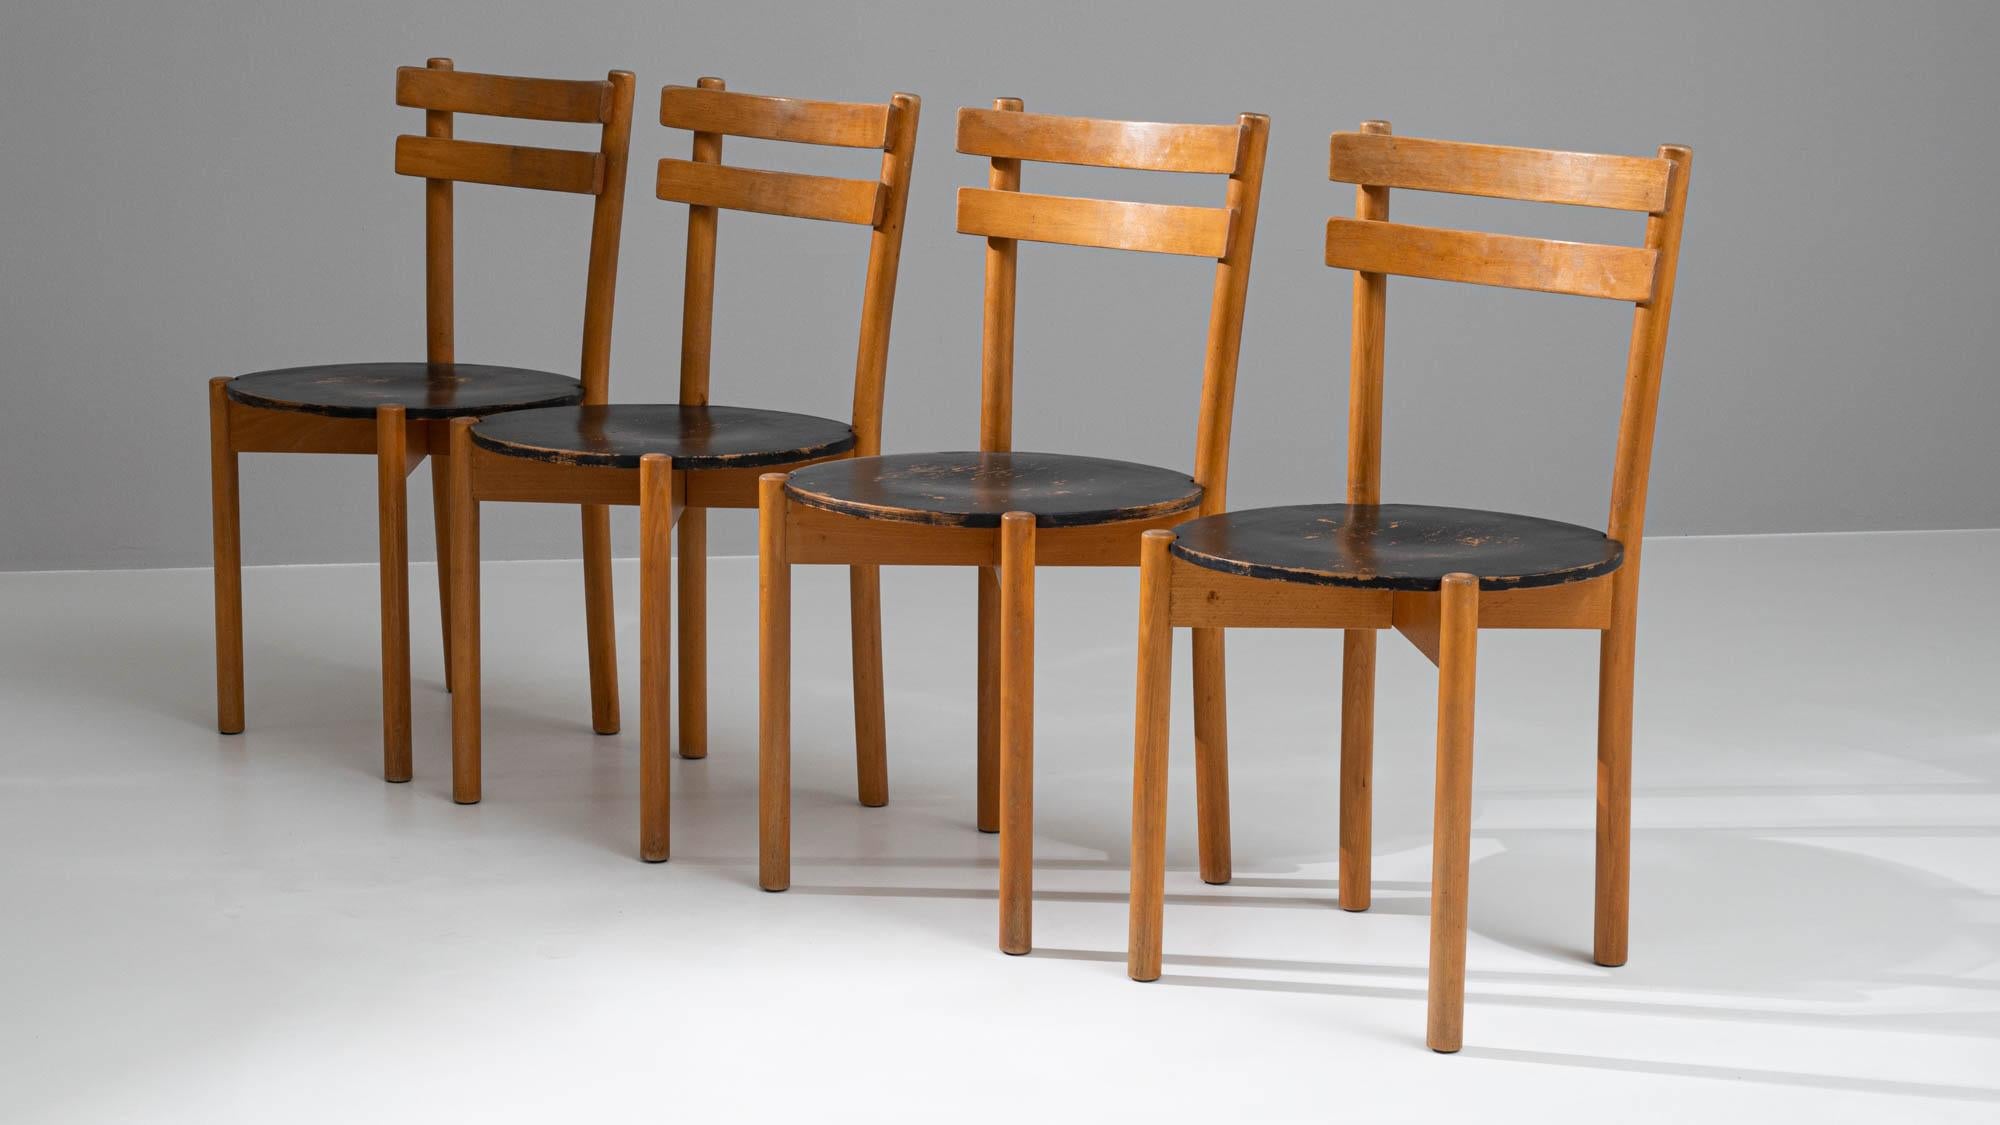 20th Century German EKA Wohnmöbel Wooden Dining Chairs, Set of 4 For Sale 6